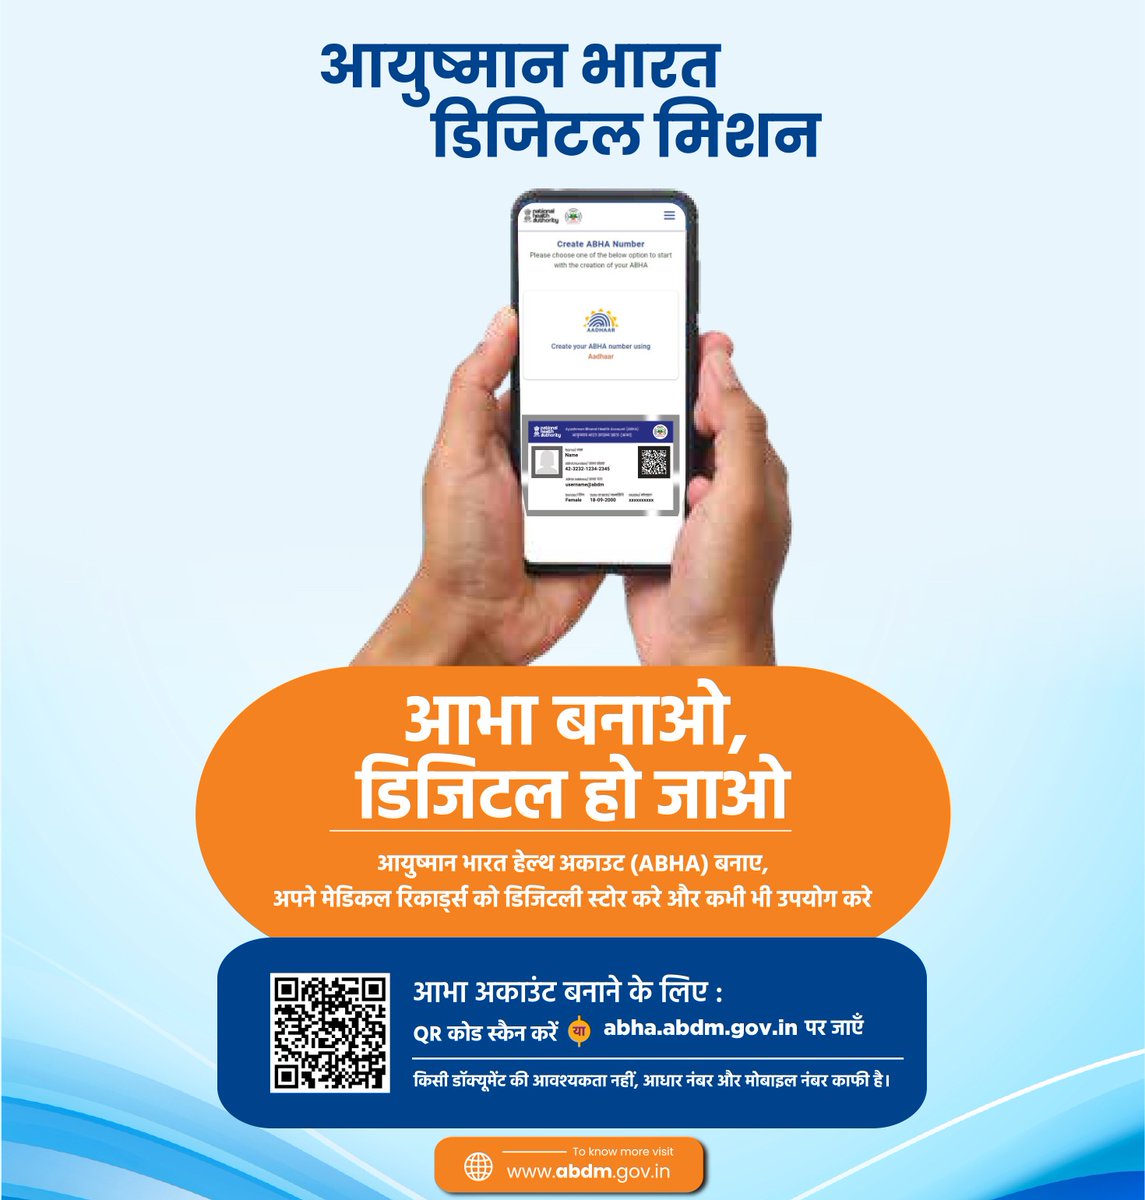 'The Ayushman Bharat Digital Mission, building an integrated national digital health ecosystem, is pivotal in laying the groundwork for these pillars. ABDM’s approach to healthcare is anchored in robust technological & regulatory principles.' Read More: ehealth.eletsonline.com/2024/04/algori…